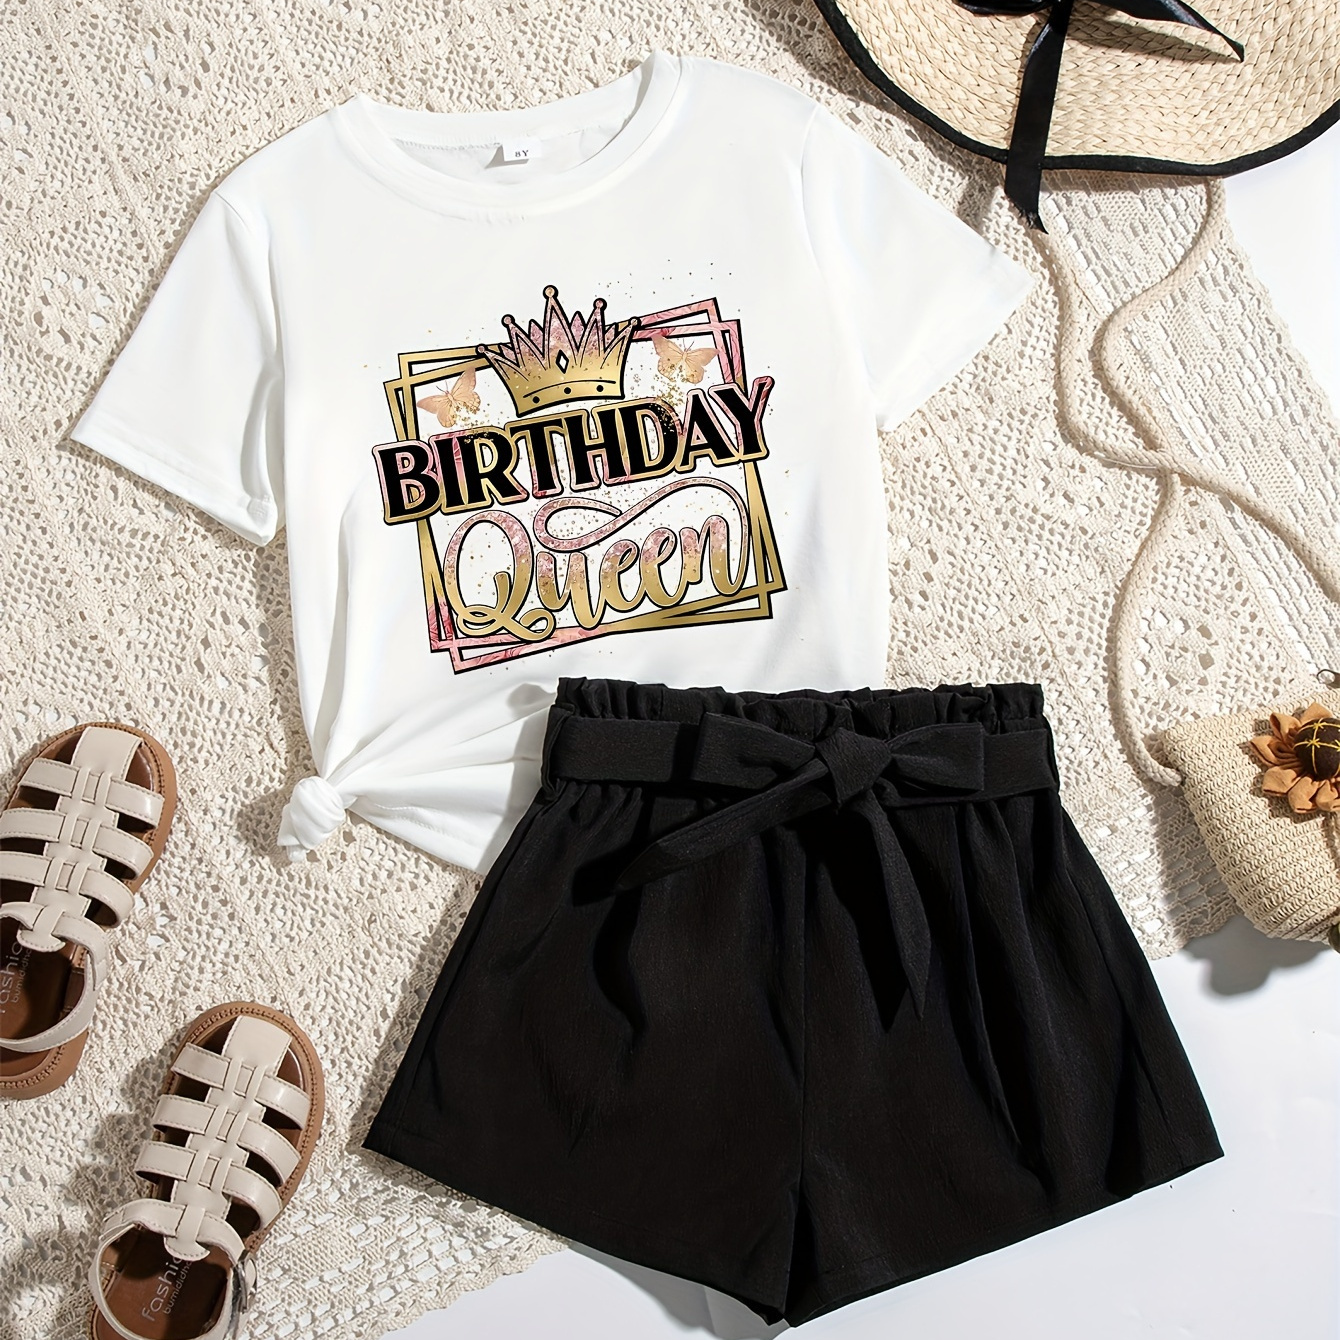 

Birthday Queen & Crown Graphic Print, Tween Girls' Casual & Stylish Outfit, 2pcs/set Short Sleeve Crew Neck Tee & High Waisted Paper Bag Shorts With Belt For Spring & Summer, Tween Girls' Clothing